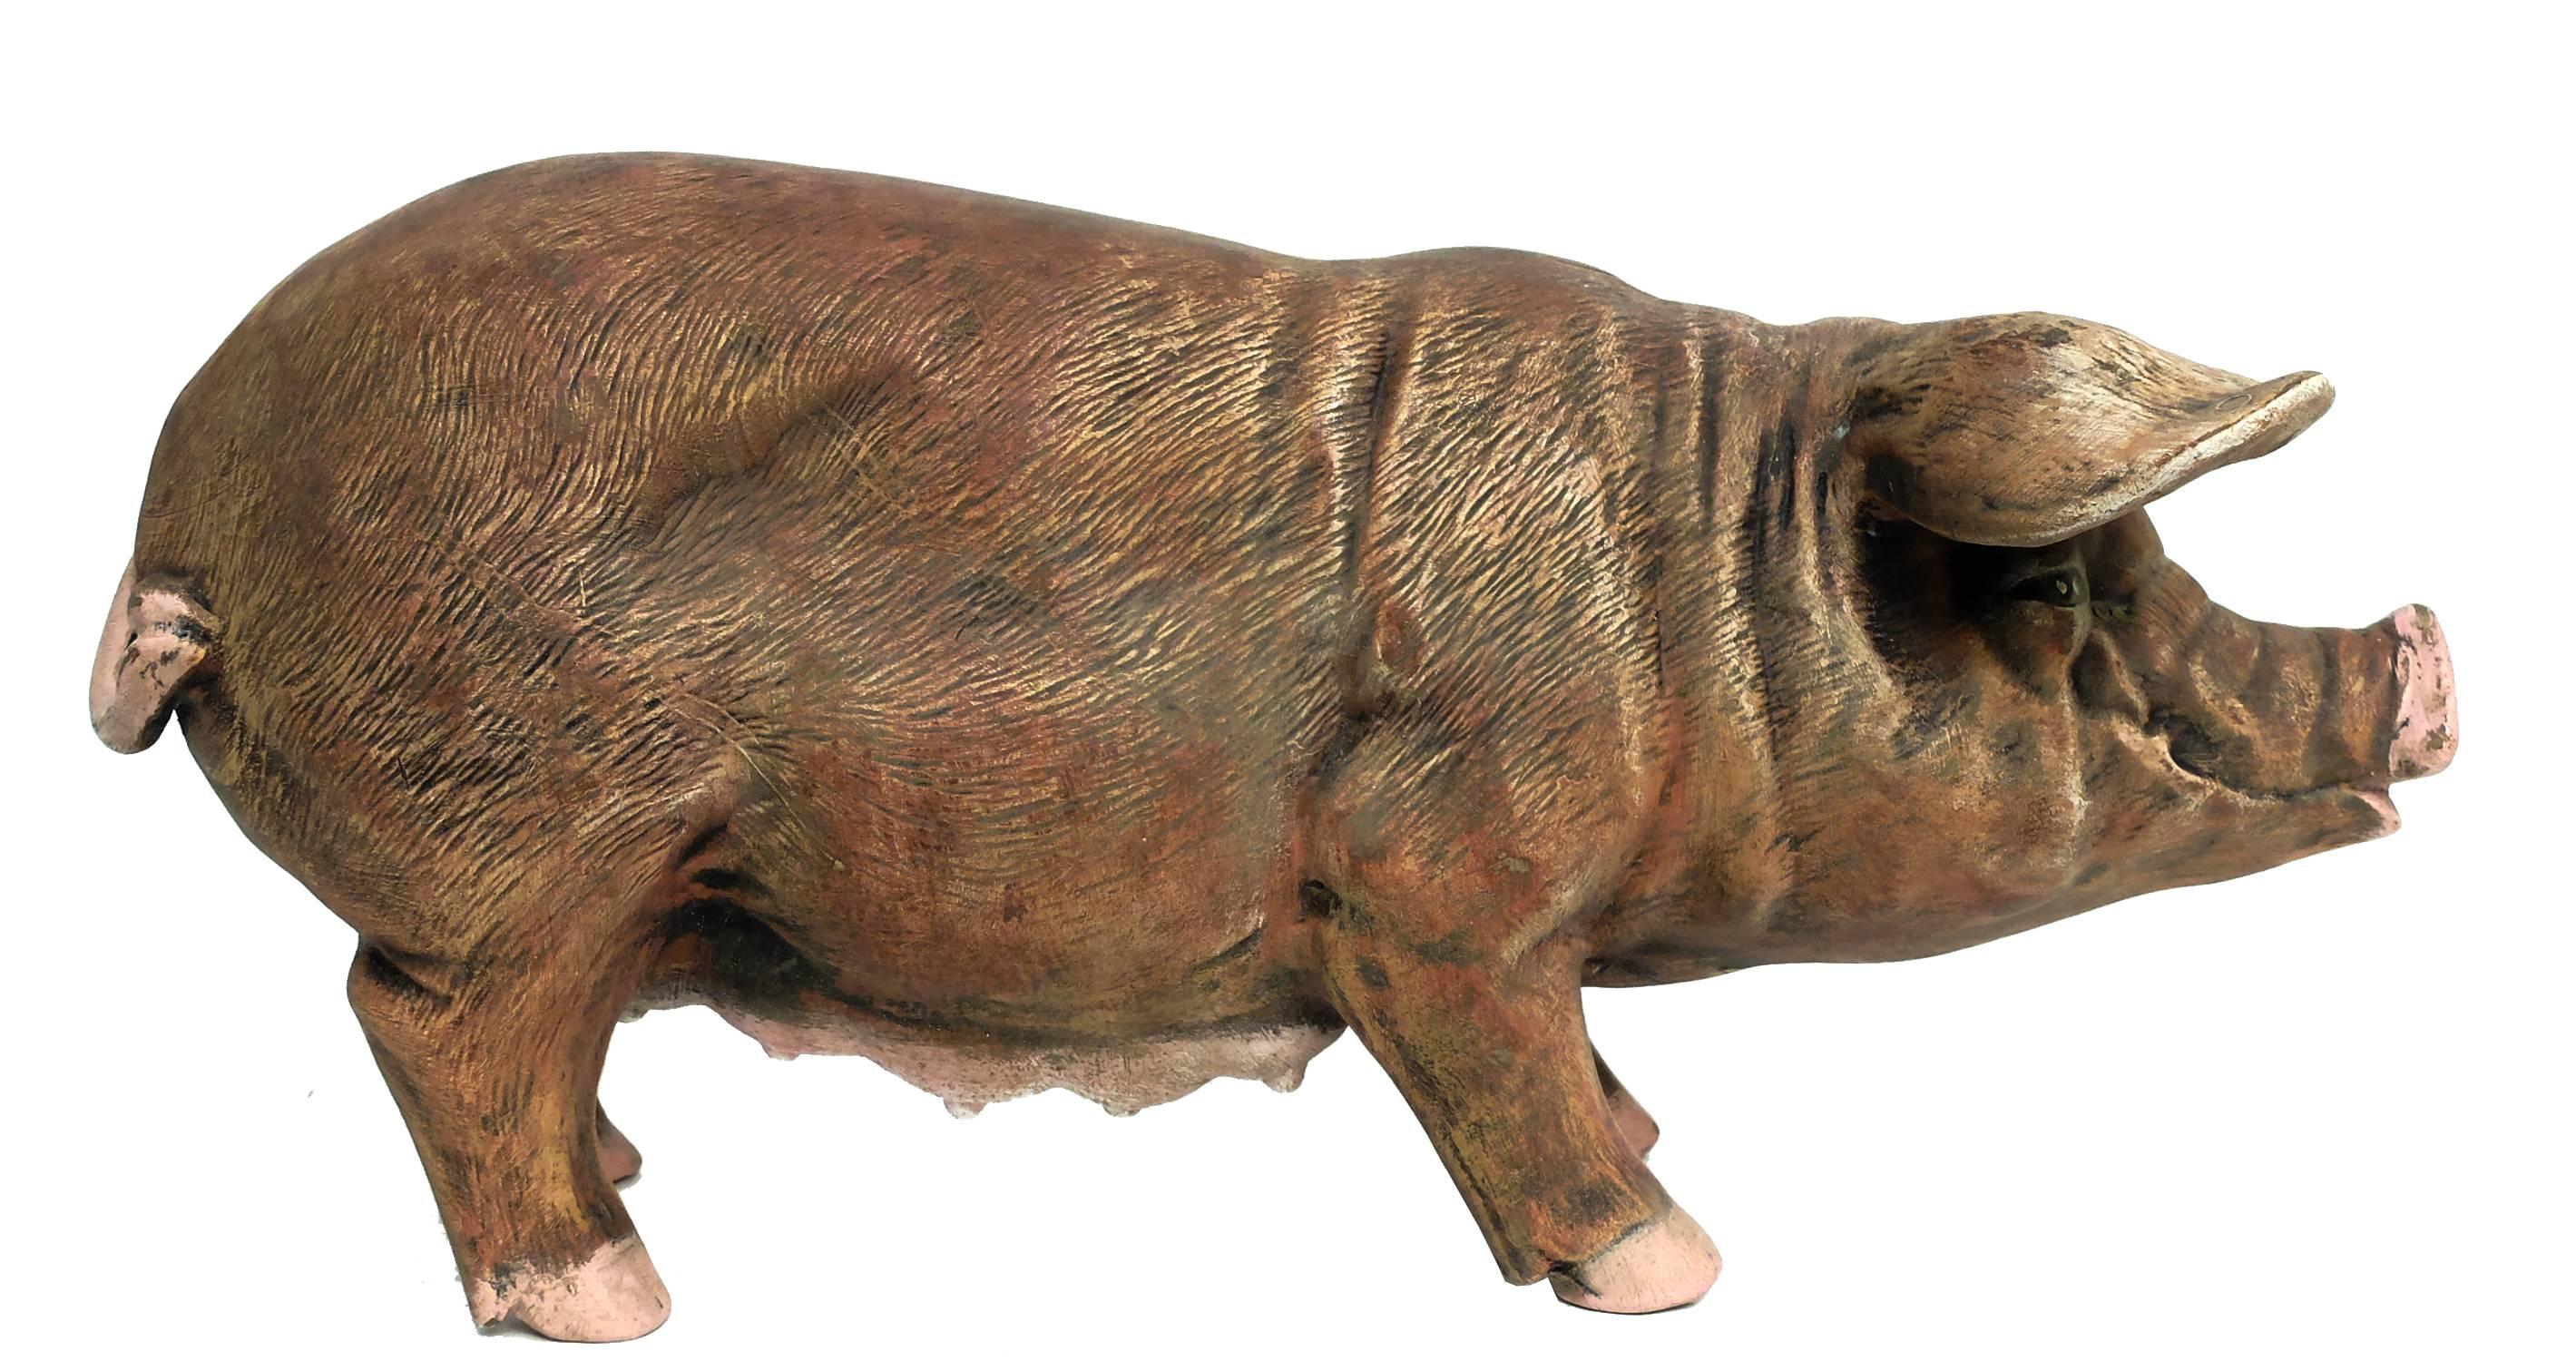 Early 20th Century Italian Terracotta Sculpture Depicting a Pig